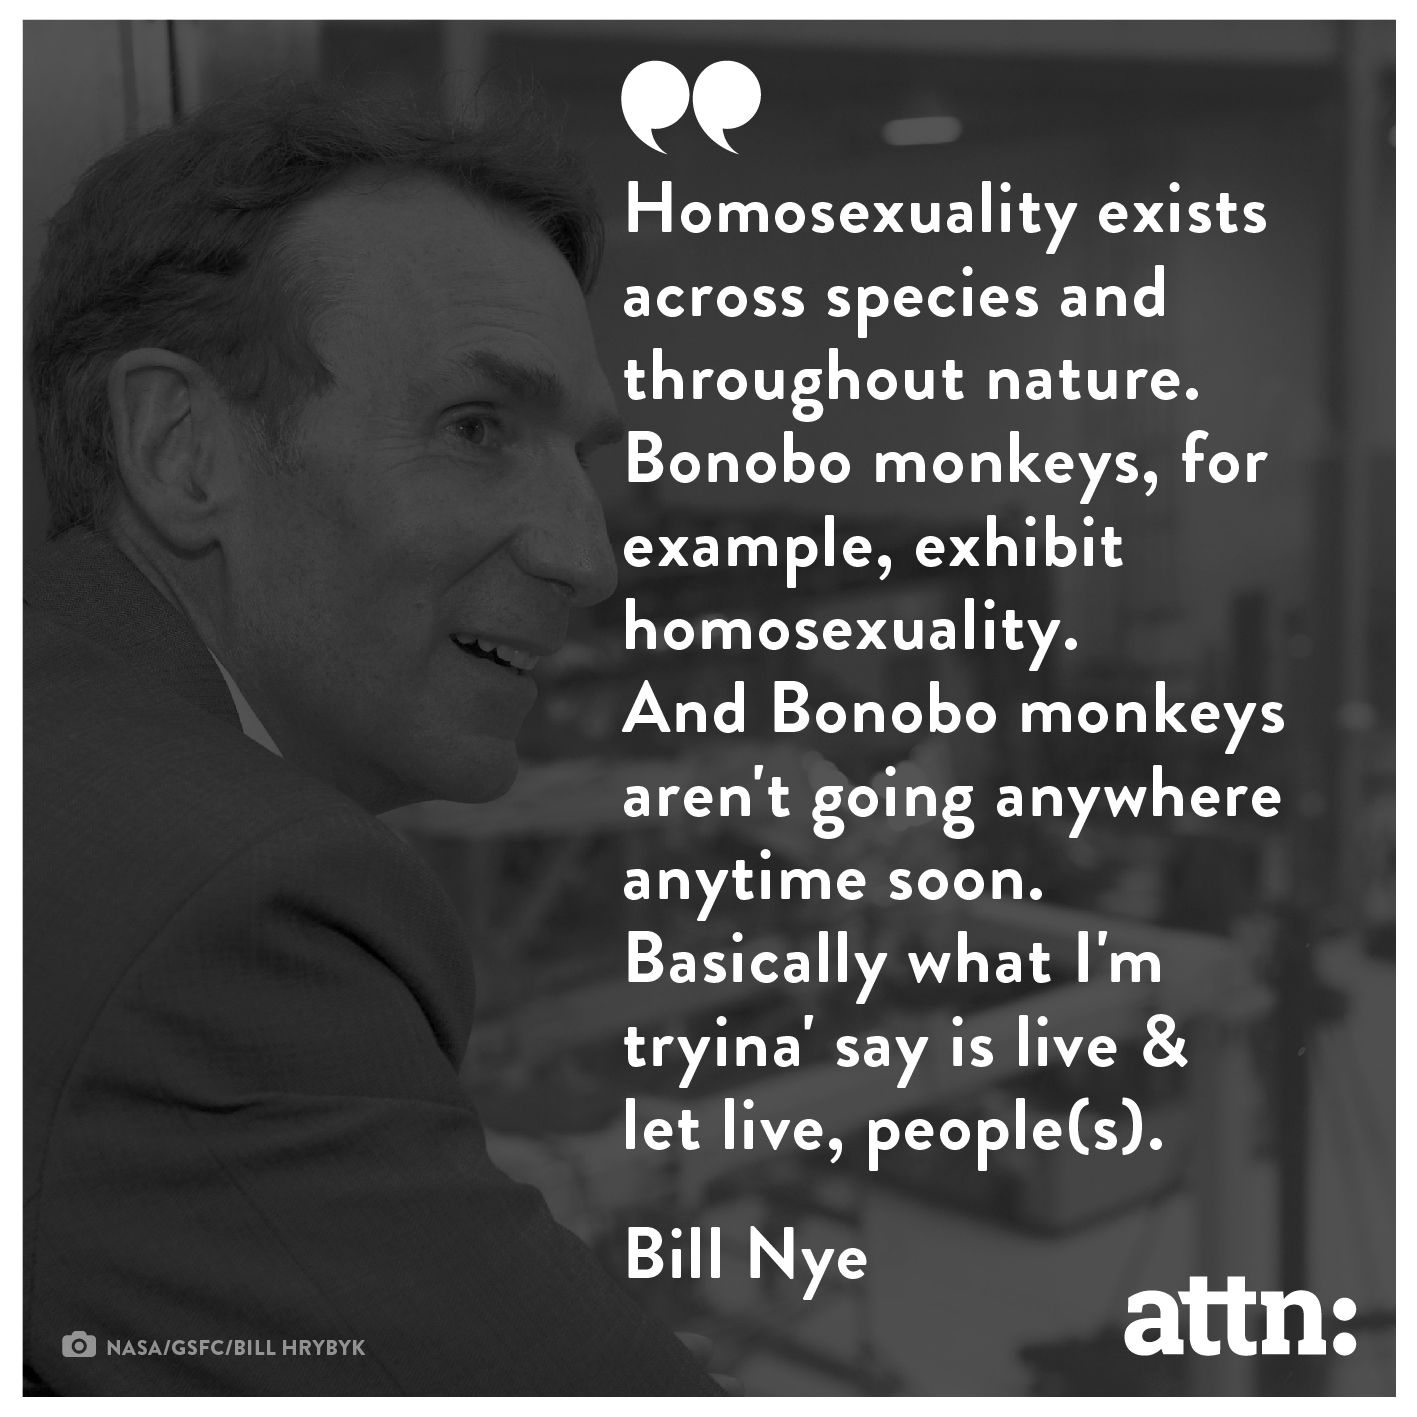 Bill Nye talks about homosexuality in other species